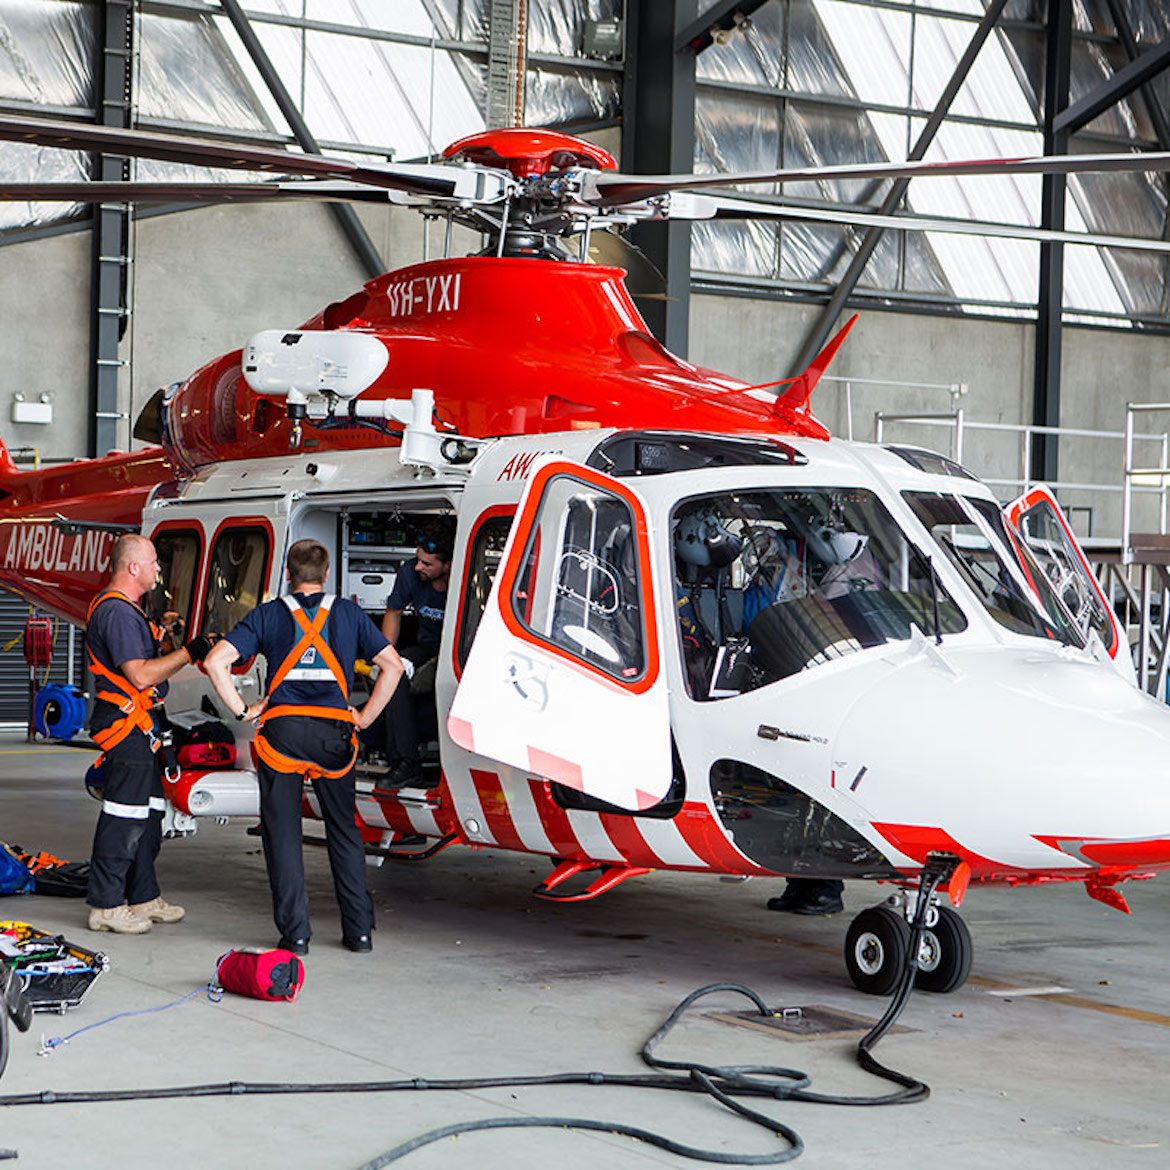 Victoria Air Ambulance AW139 helicopter.(Victorian government website)